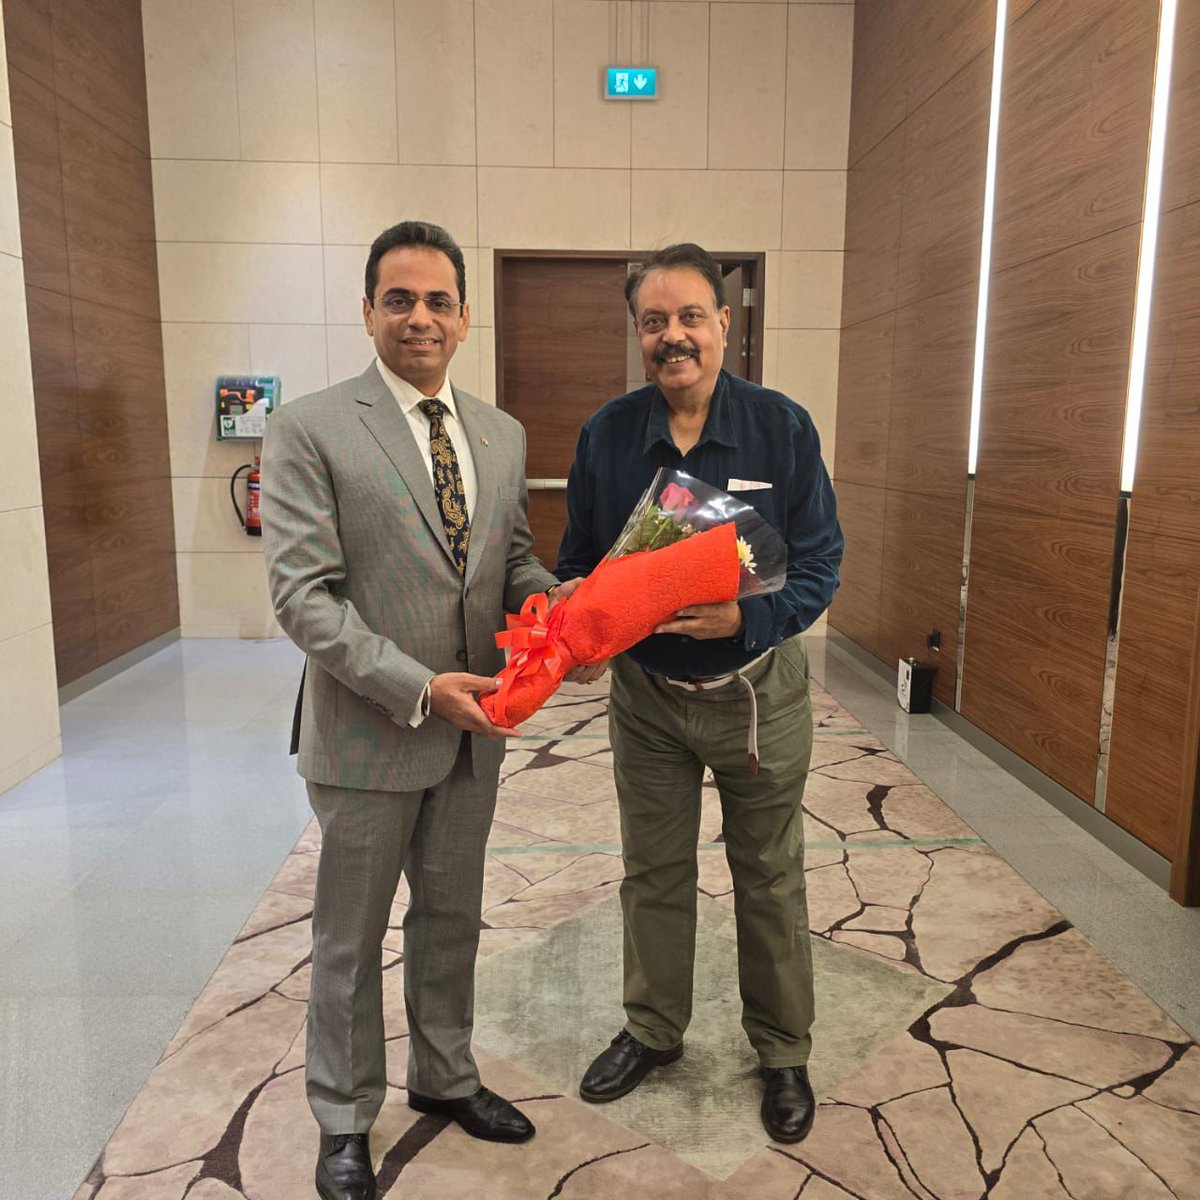 Amb @Amit_Narang had the pleasure of welcoming to Muscat, Dr. BR Mani, Director General of the National Museum, New Delhi. His visit will further enhance the recent strides made in bilateral cooperation in history and heritage.